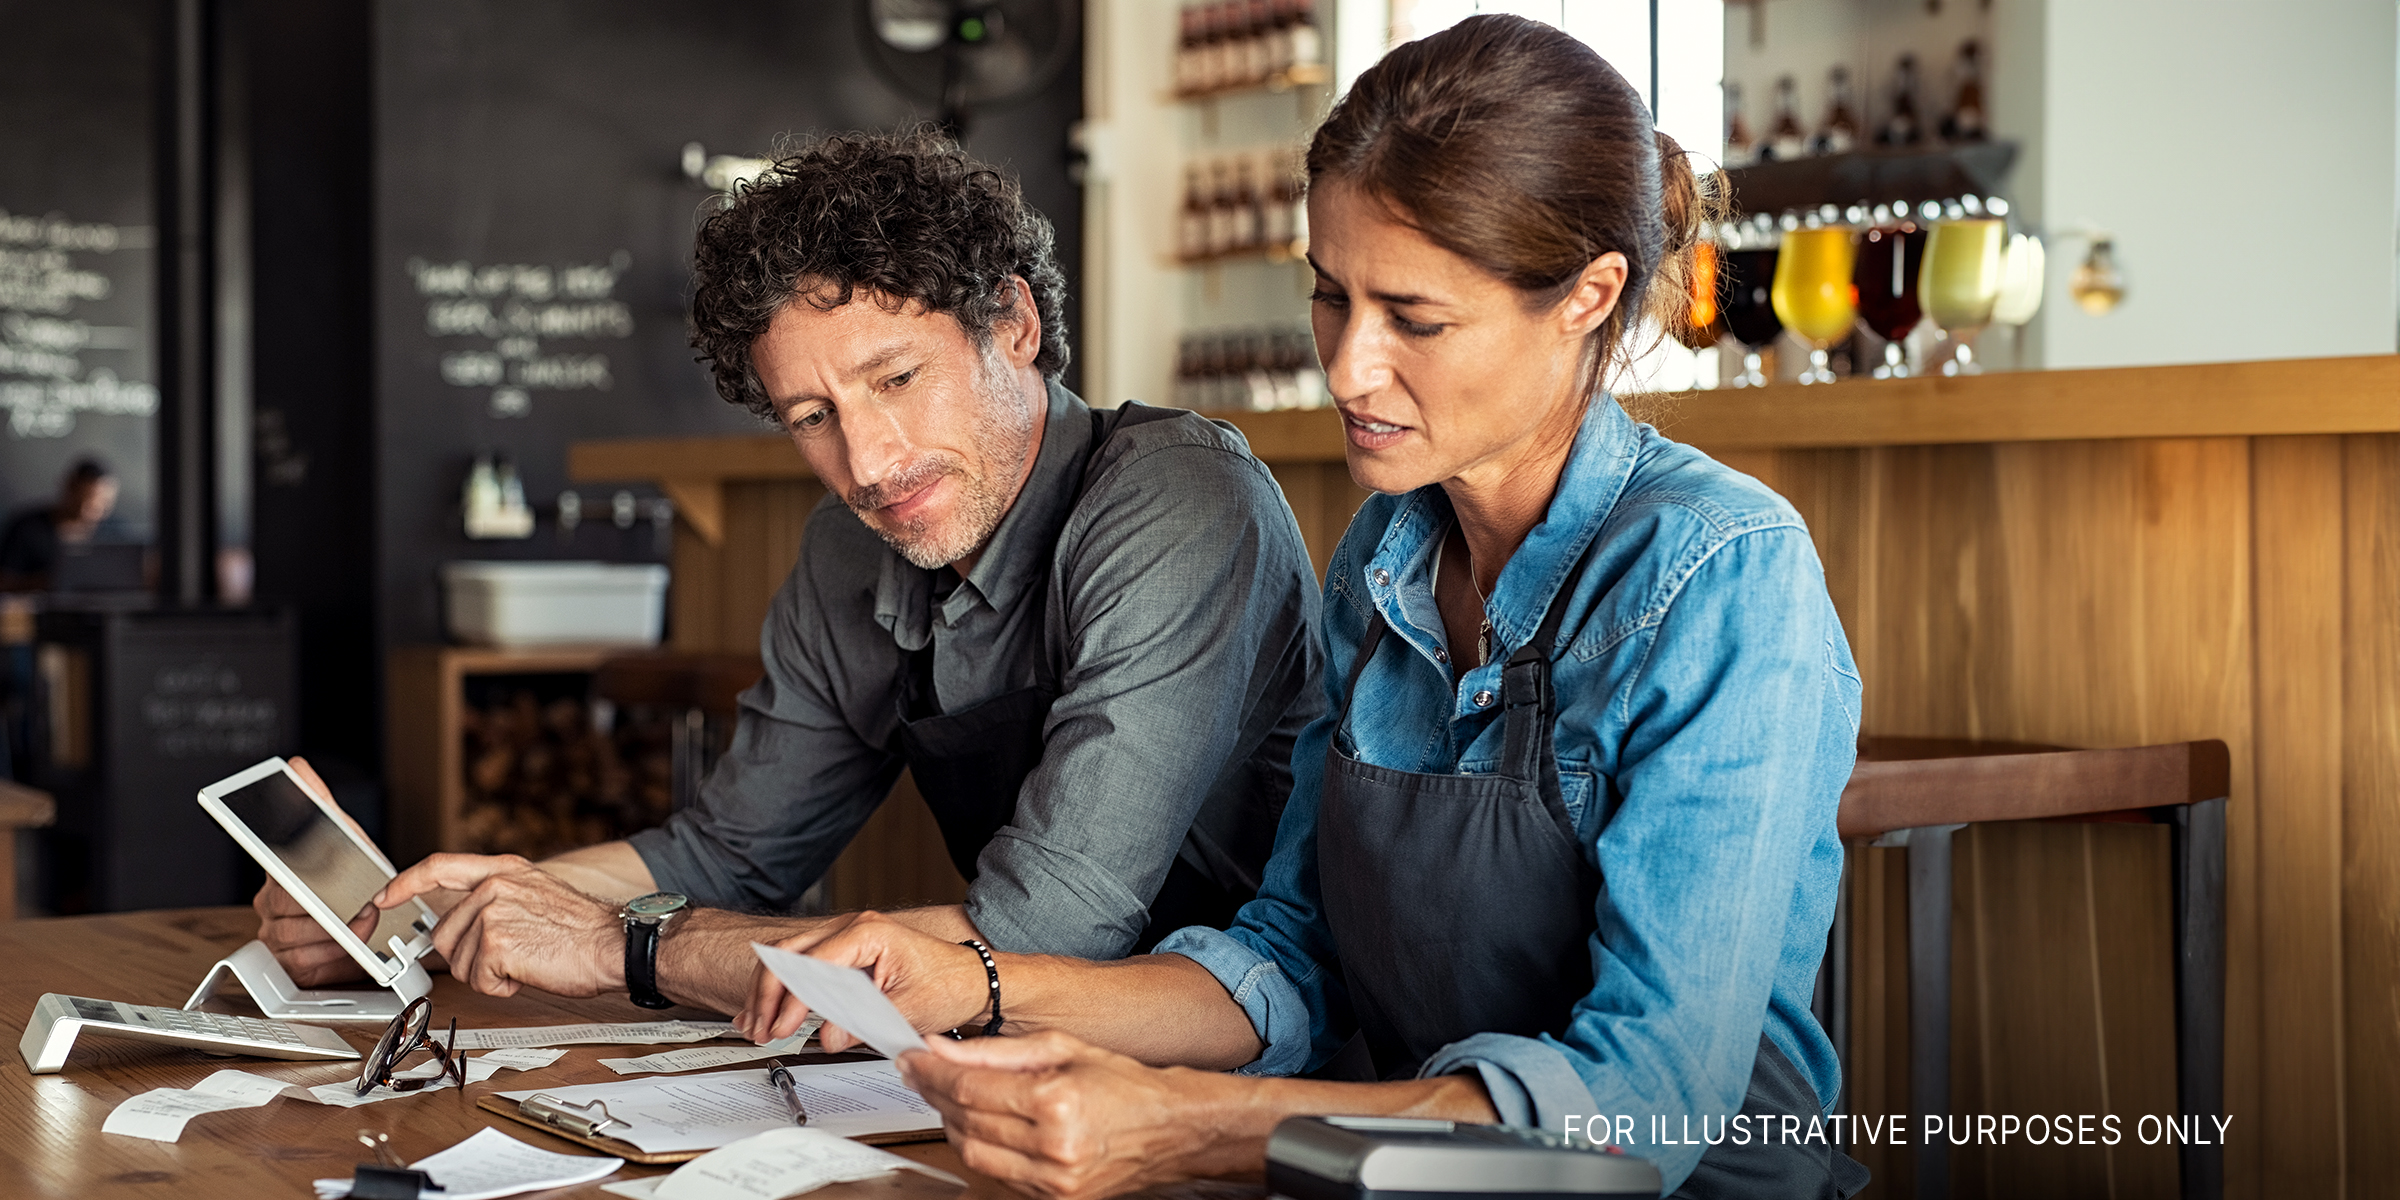 A man a woman looking stressed while calculating receipts | Source: Shutterstock